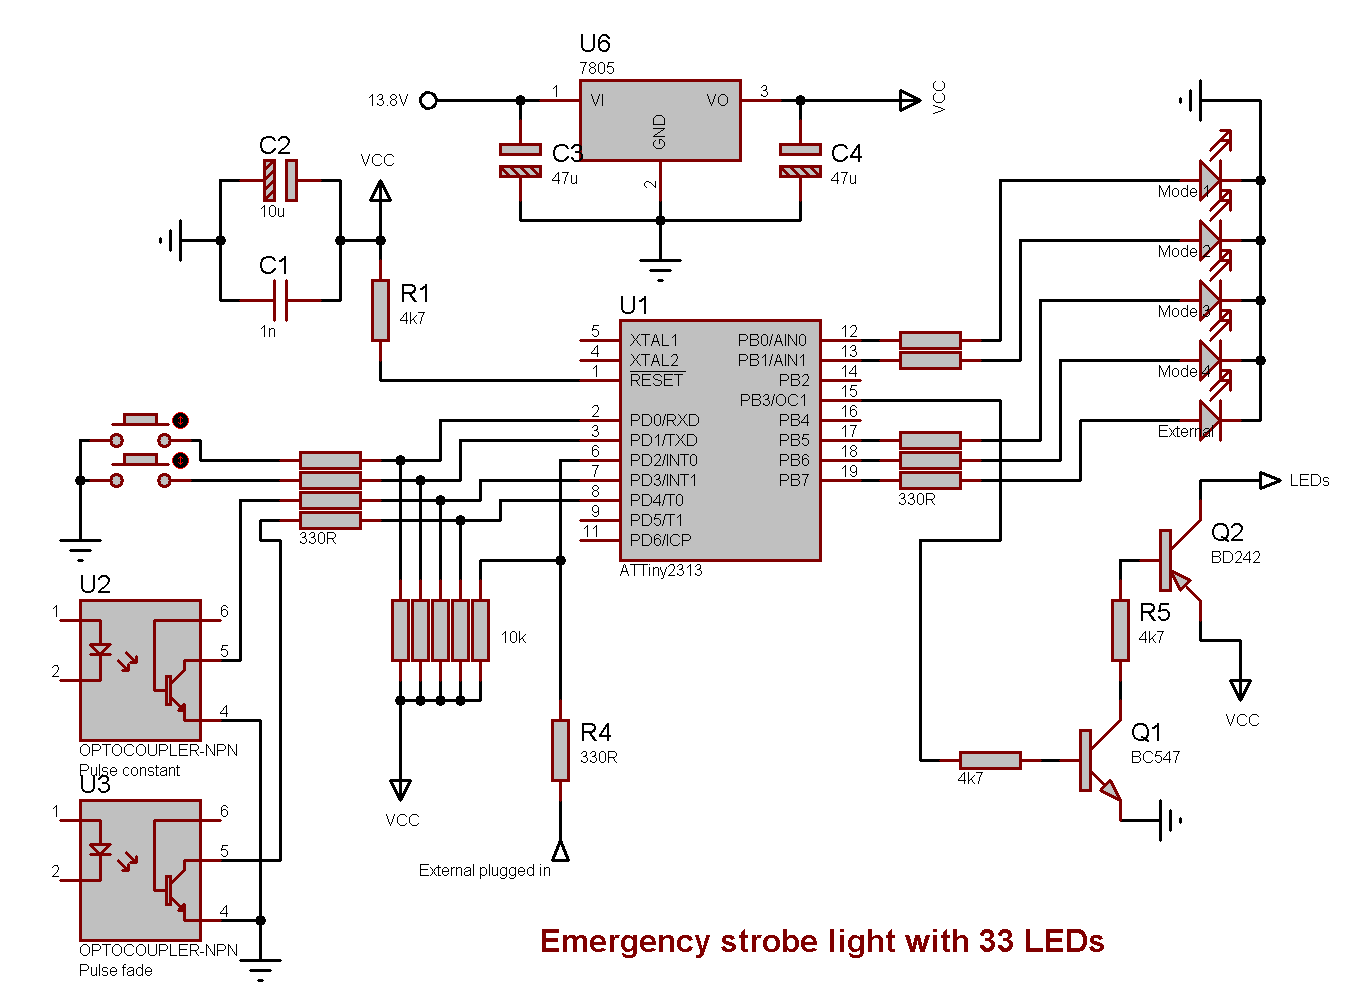 Schematic drawing of the emergency LED strobe